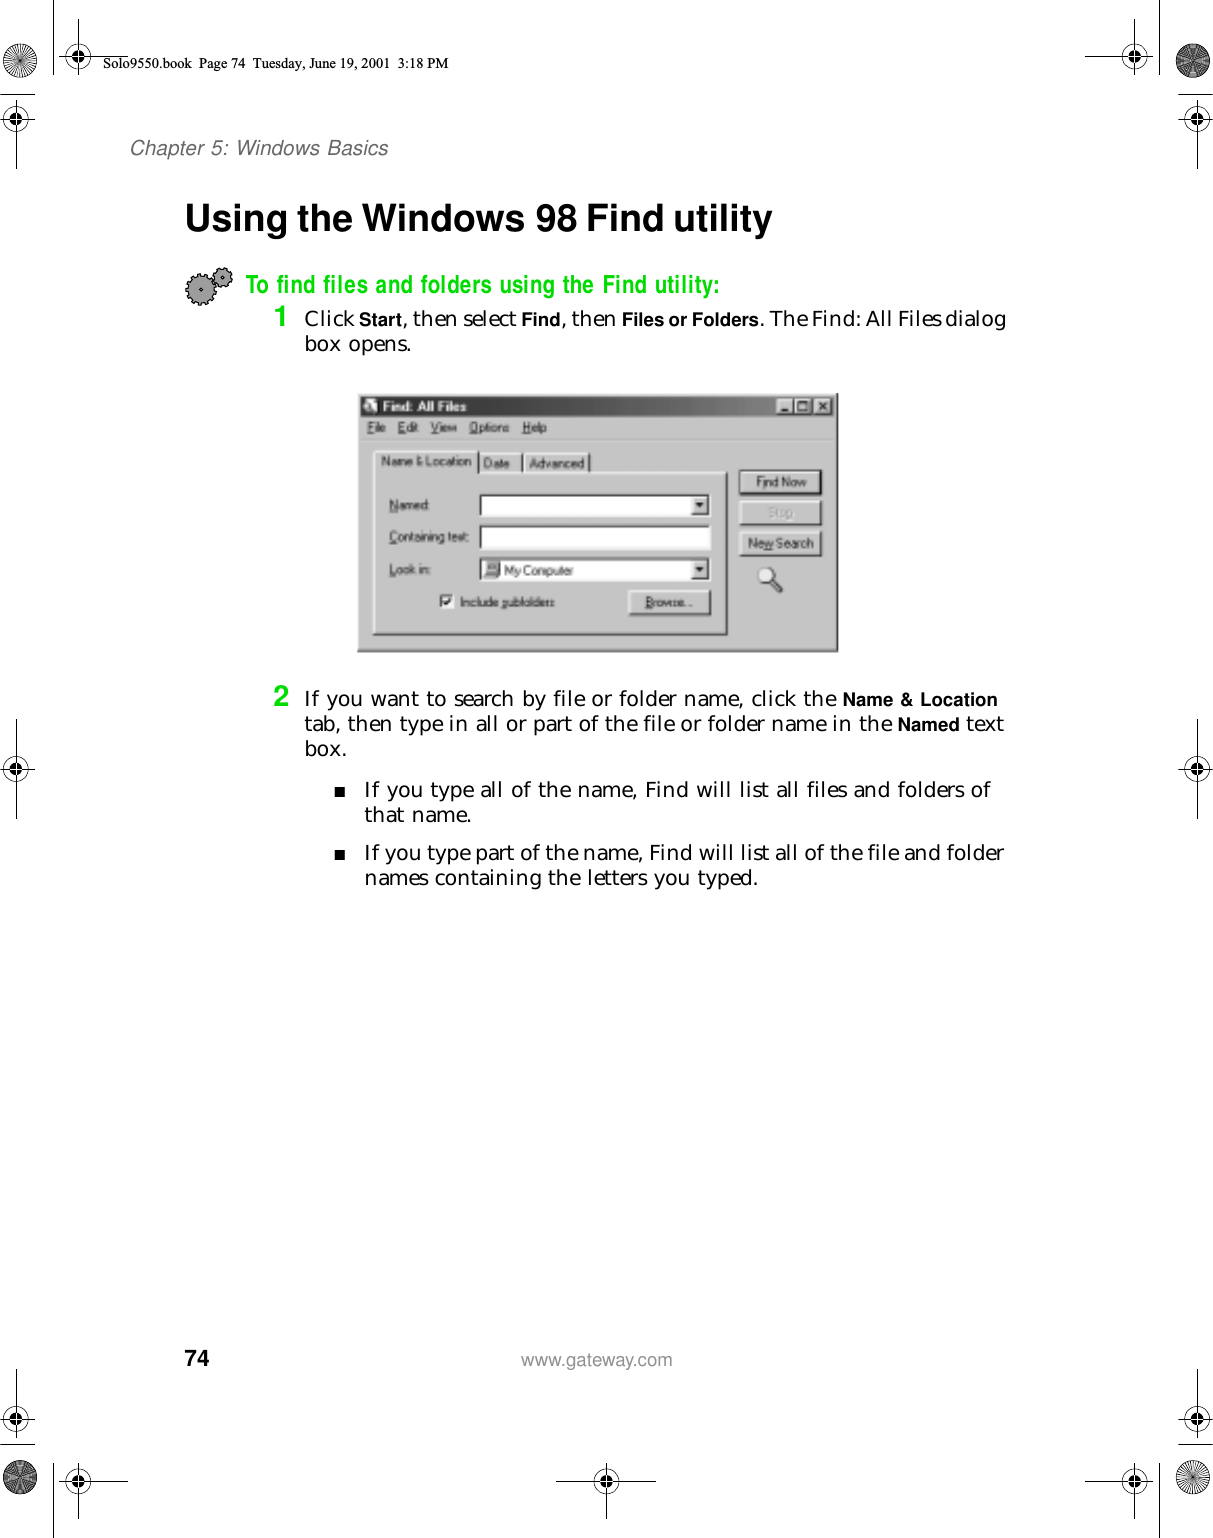 74Chapter 5: Windows Basicswww.gateway.comUsing the Windows 98 Find utilityTo find files and folders using the Find utility:1Click Start, then select Find, then Files or Folders. The Find: All Files dialog box opens.2If you want to search by file or folder name, click the Name &amp; Location tab, then type in all or part of the file or folder name in the Named text box.■If you type all of the name, Find will list all files and folders of that name.■If you type part of the name, Find will list all of the file and folder names containing the letters you typed.Solo9550.book Page 74 Tuesday, June 19, 2001 3:18 PM